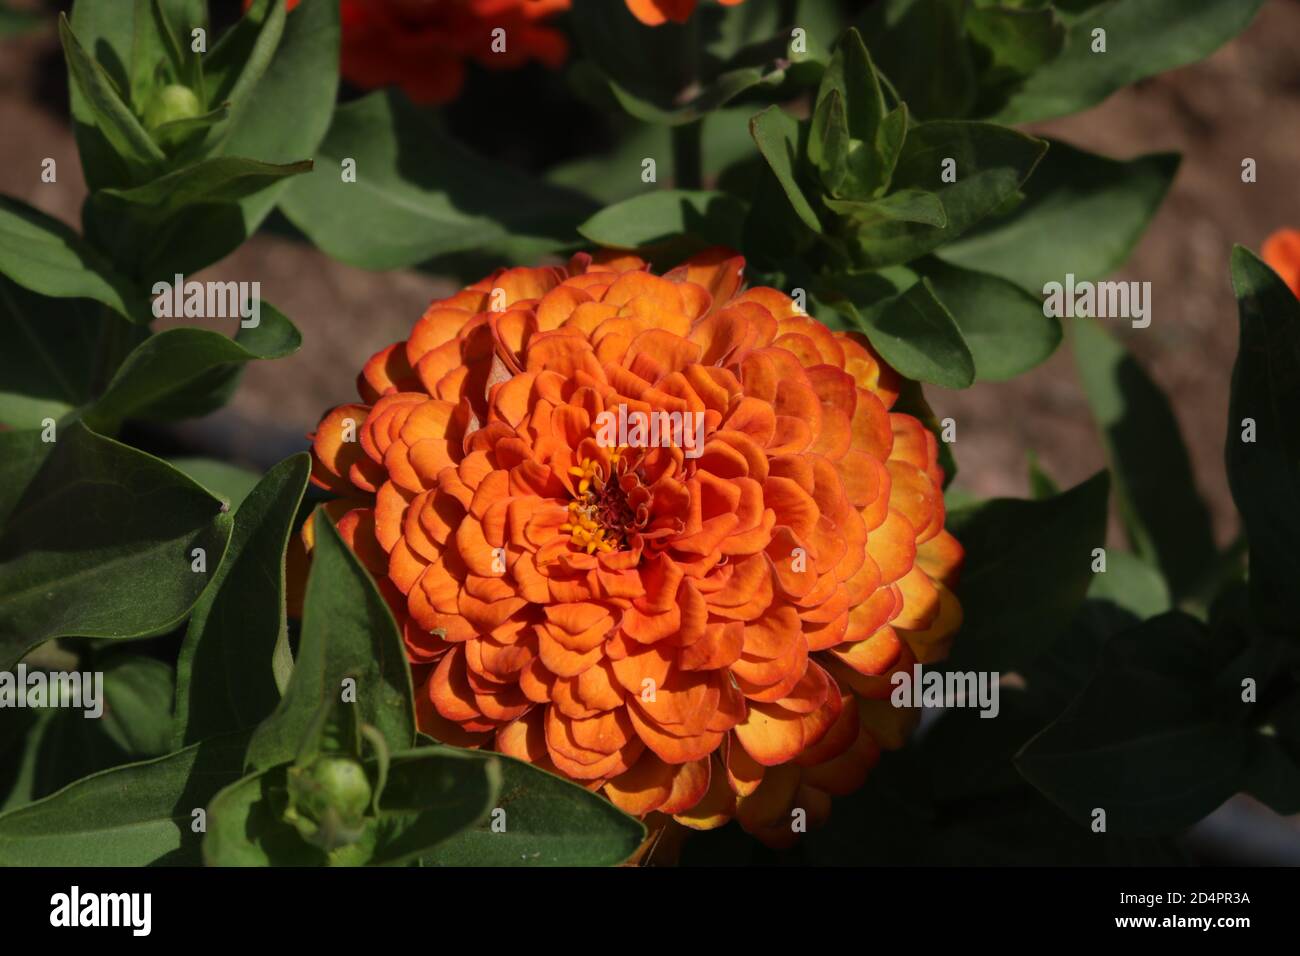 Orange Flower in bloom on a green background, Paphos, Cyprus Stock Photo